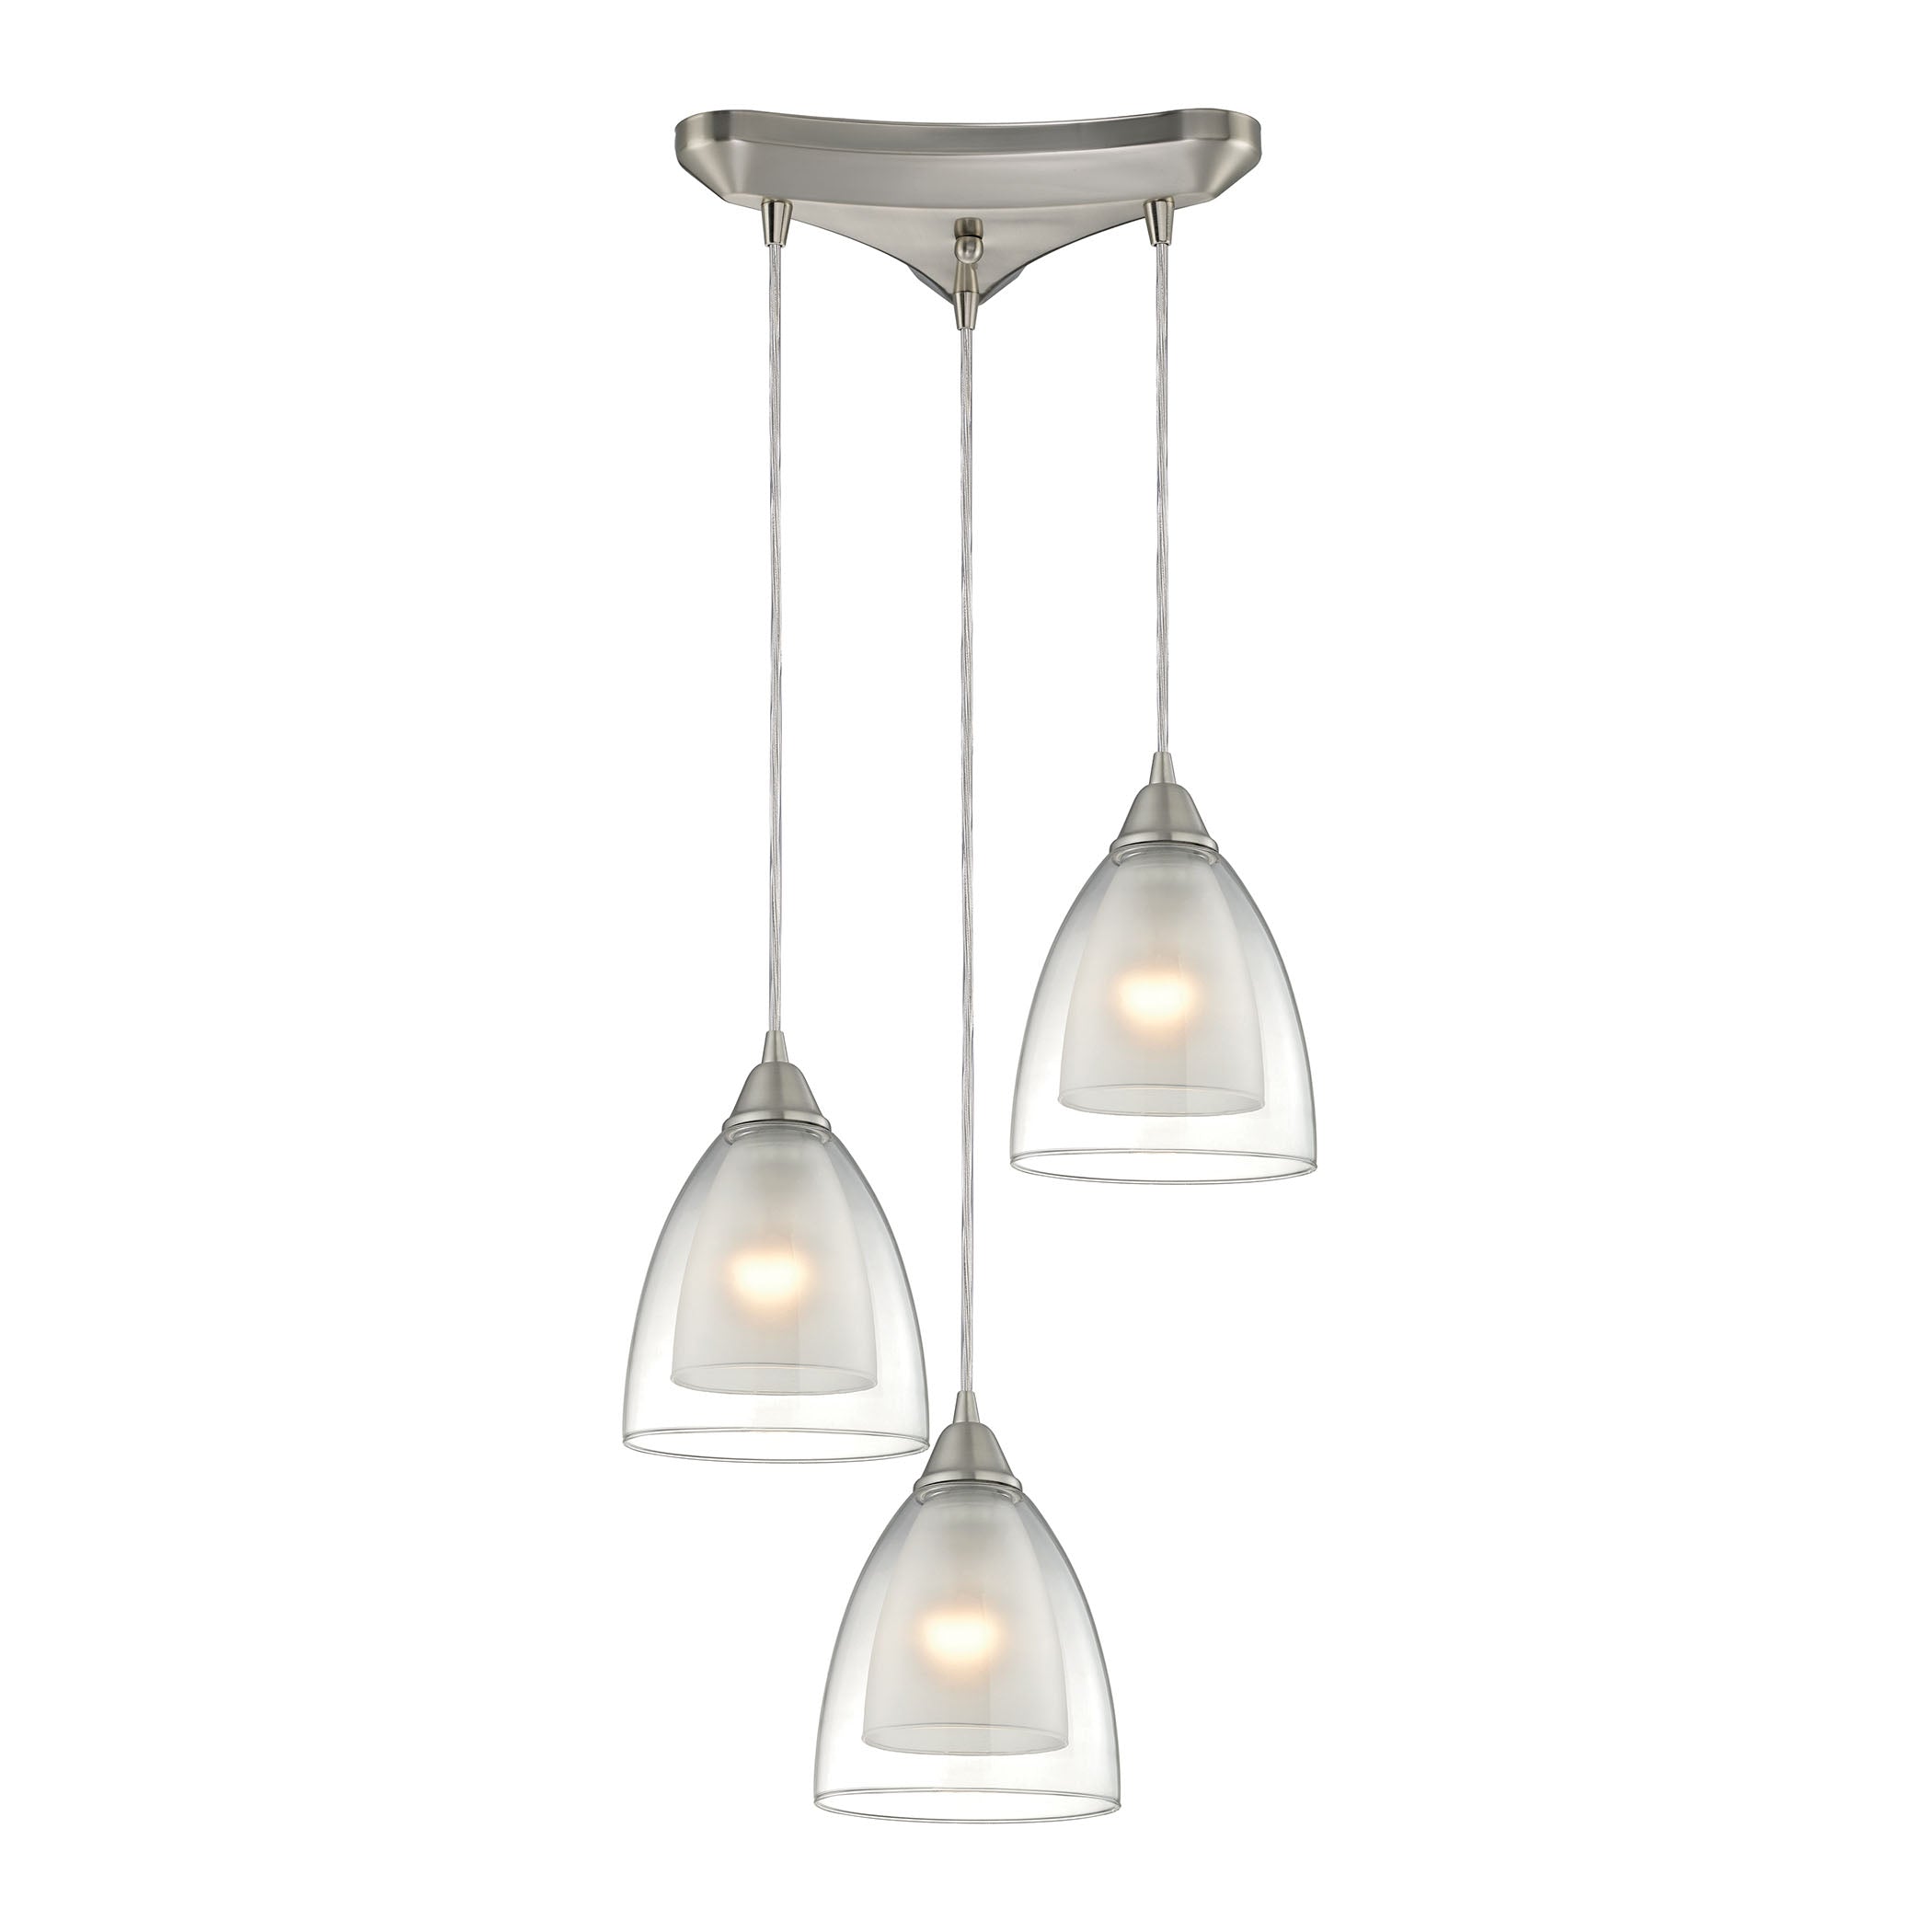 ELK Lighting 10464/3 Layers 3-Light Triangular Pendant Fixture in Satin Nickel with Clear Glass